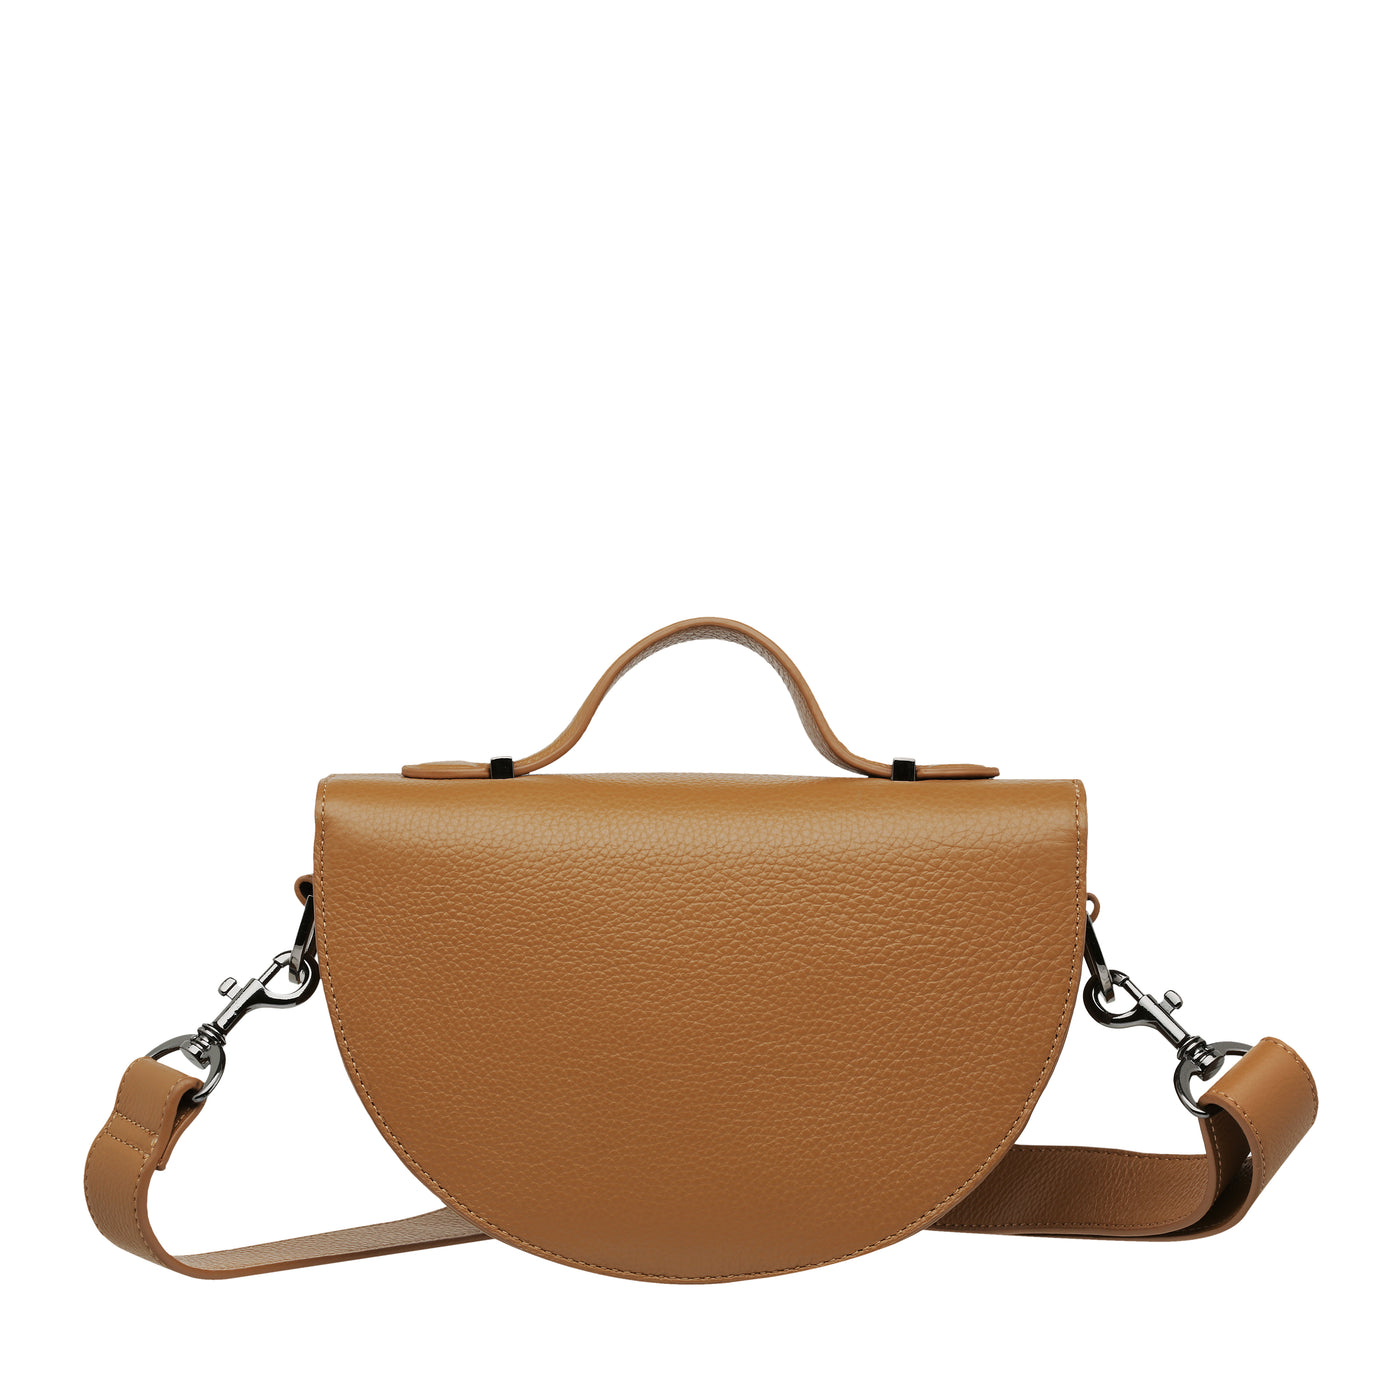 STATUS ANXIETY ALL NIGHTER BAG - TAN  The Status Anxiety All Nighter Bag is a simple stylish cross body bag, perfect for daily use as it easily fits all your essentials, and can also be carried by the top handle for an alternative bag style.